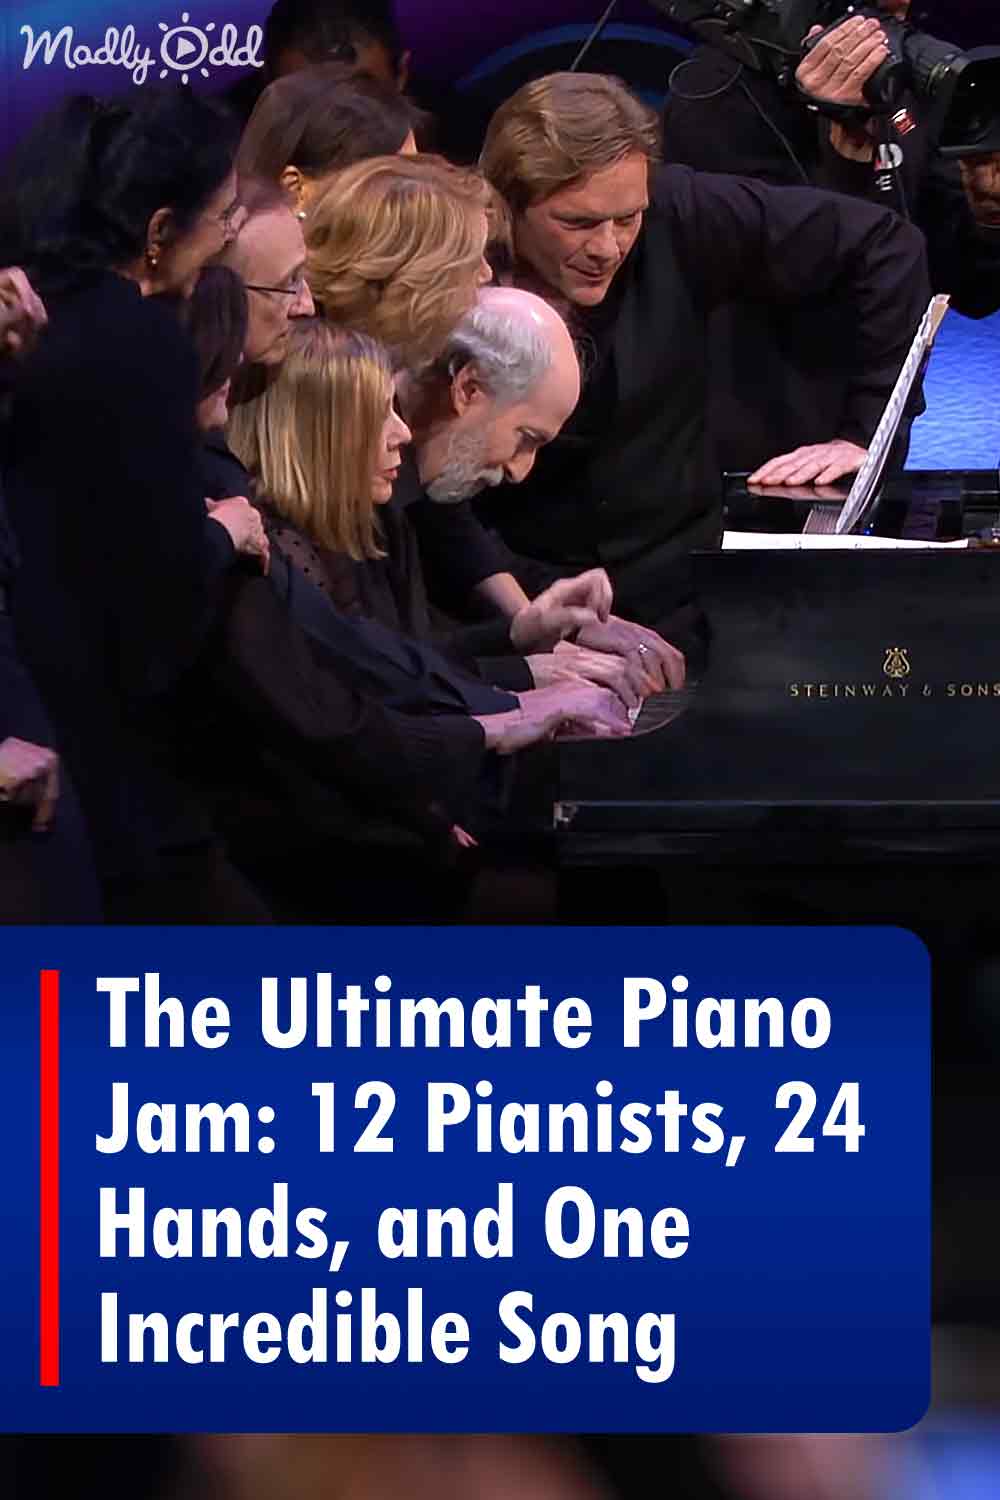 The Ultimate Piano Jam: 12 Pianists, 24 Hands, and One Incredible Song